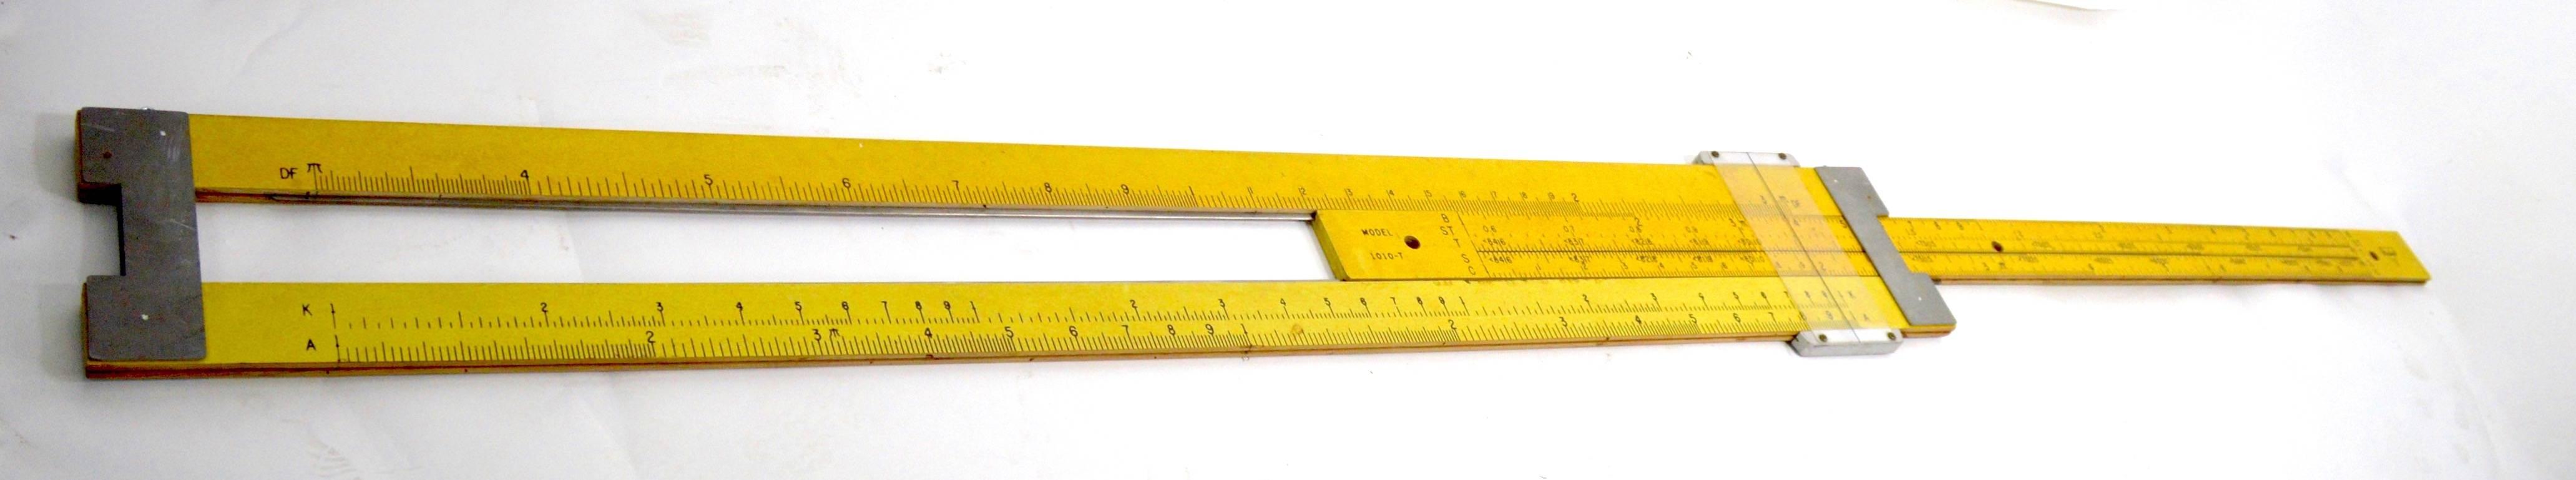 Large Slide Ruler by Pickett for Display or Teaching Aid In Good Condition In New York, NY